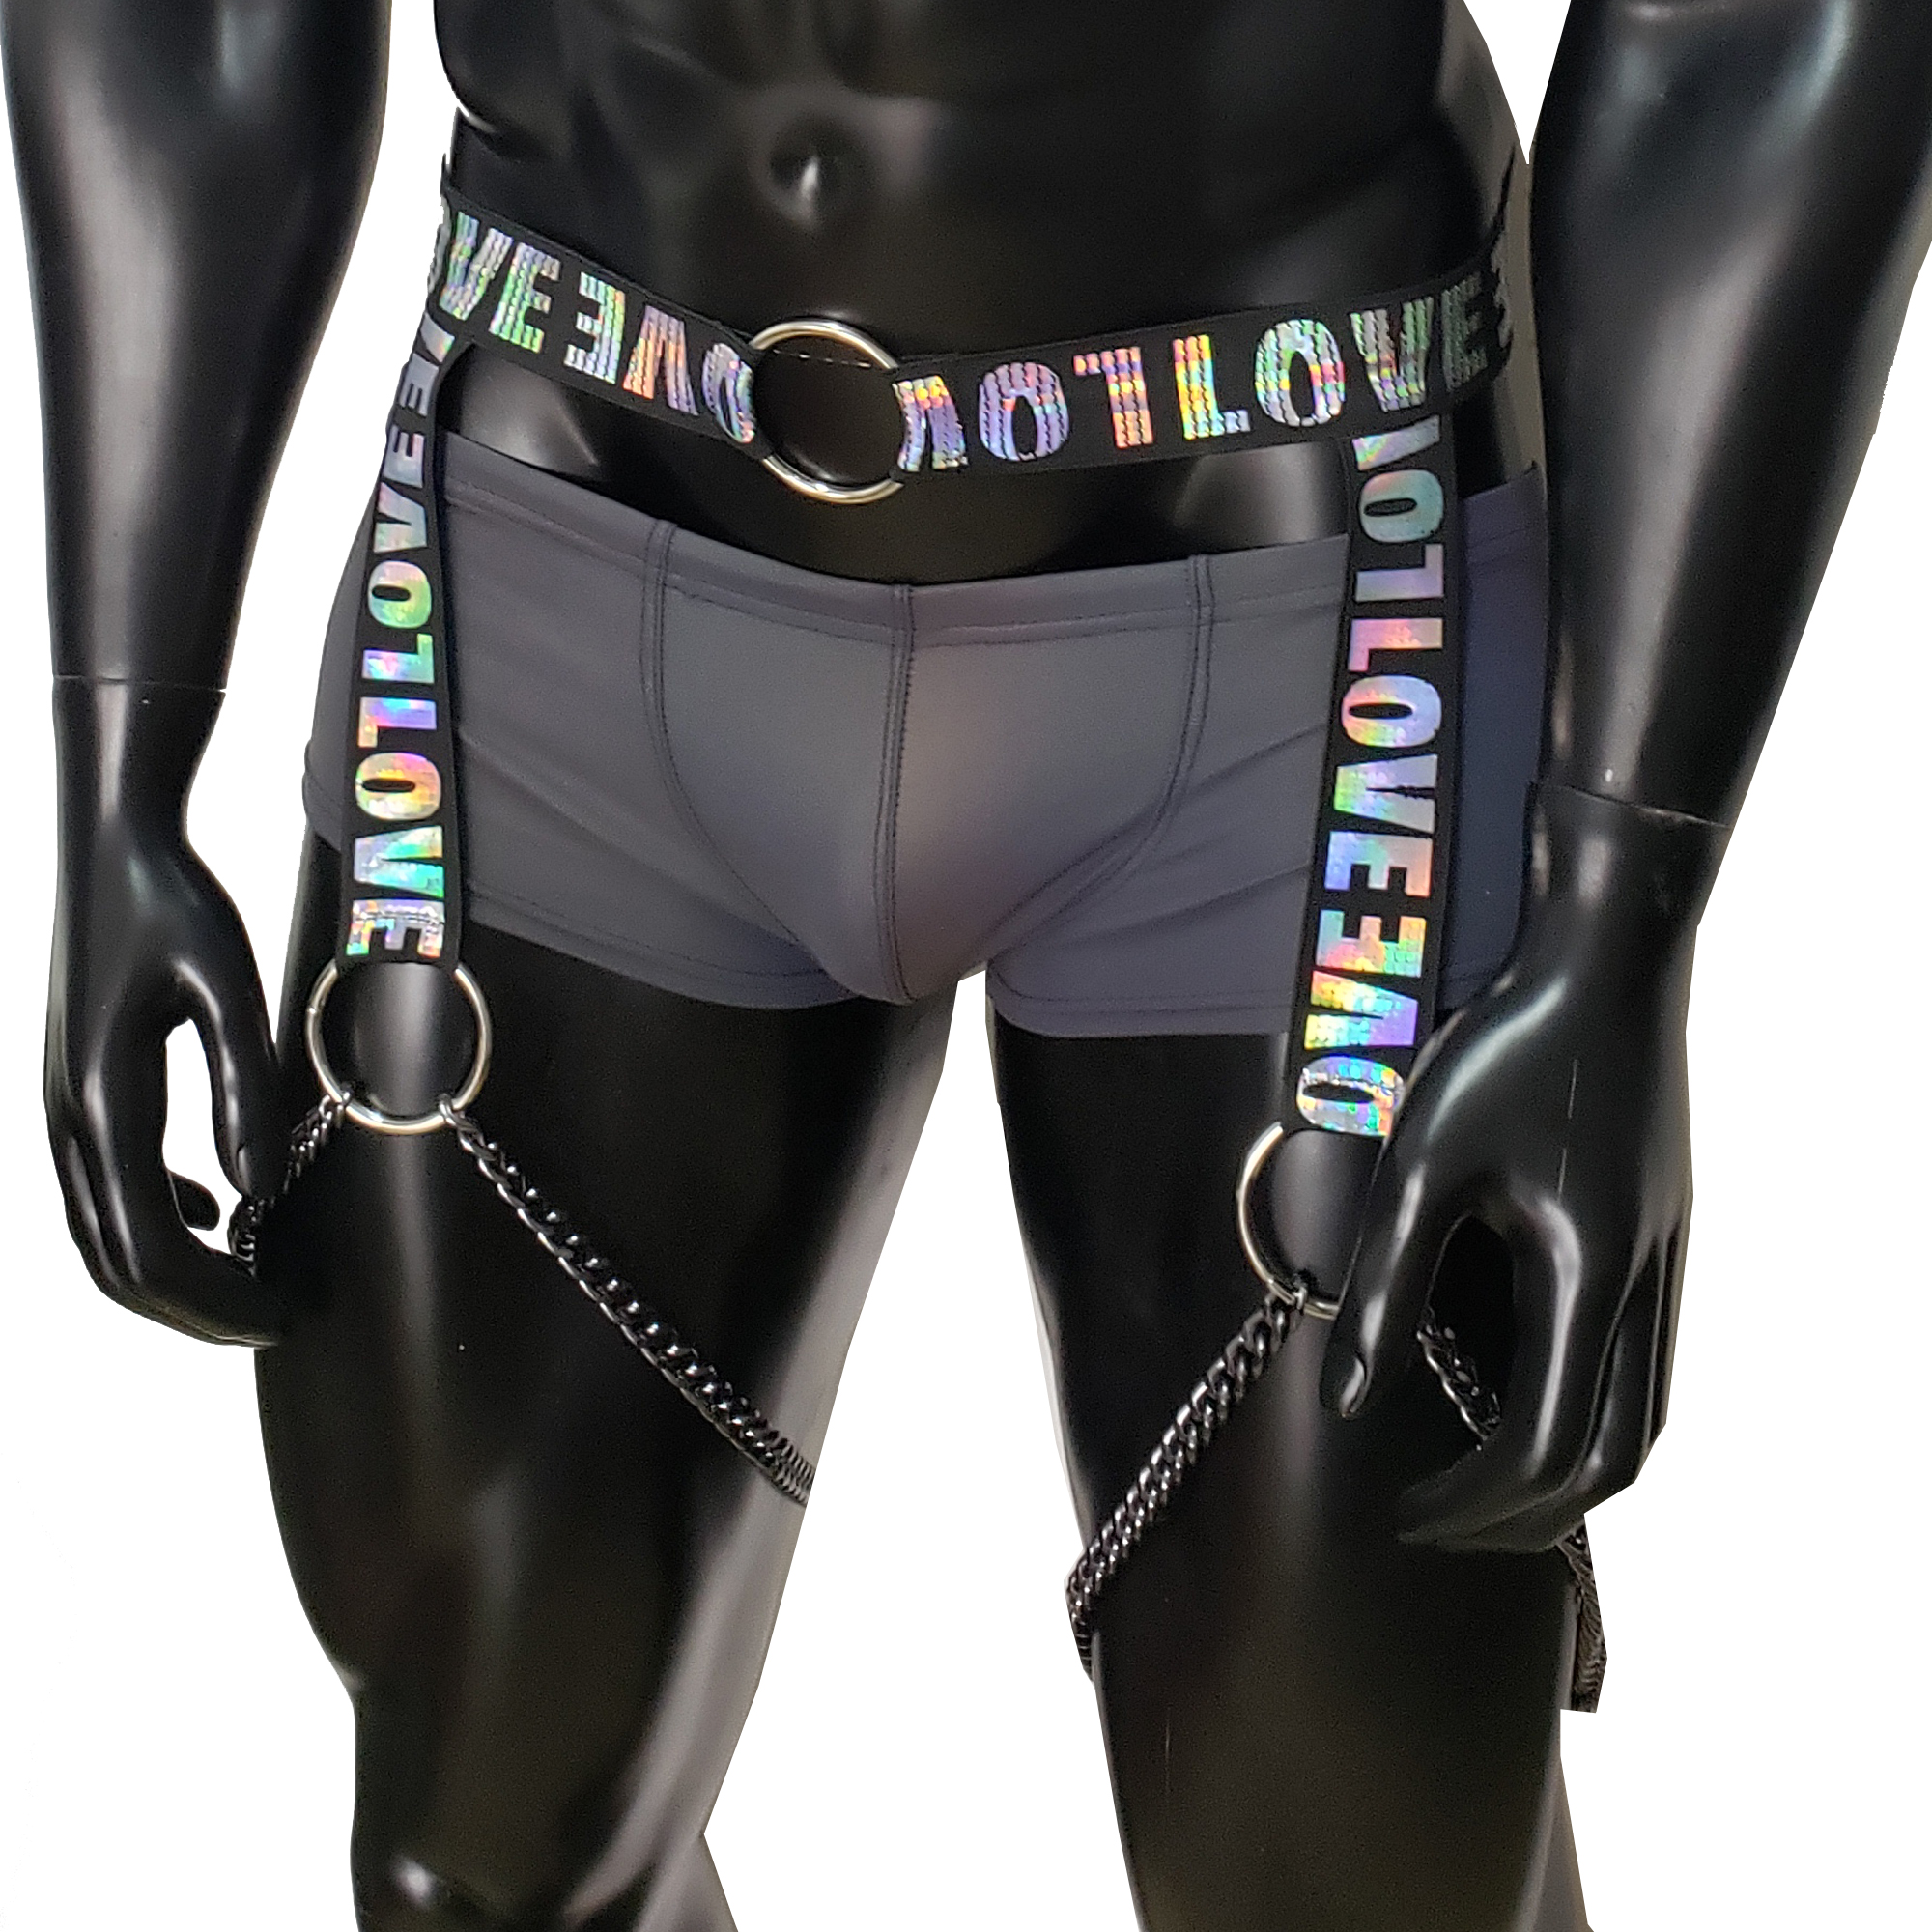 US$ 200.00 - Rhinestone Body Chain Men Chest Harness,Gay Outfit, LGBT  Pride, Gay Pride, Gay Harness Clubwear,Circuit Party Harness -  m.